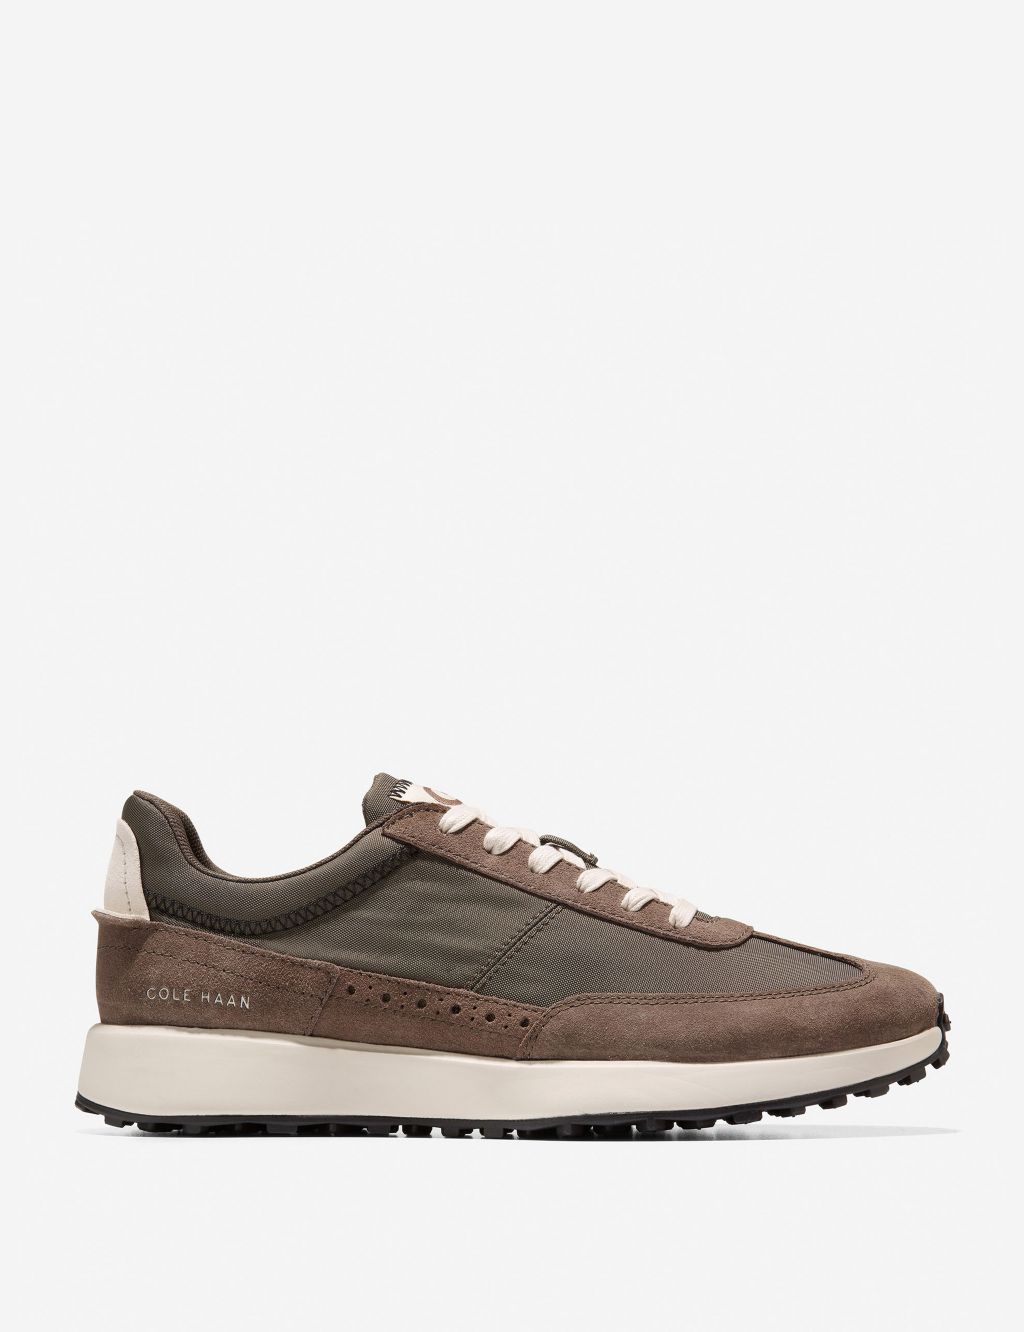 Grand Crosscourt Midtown Lace-Up Trainers image 1